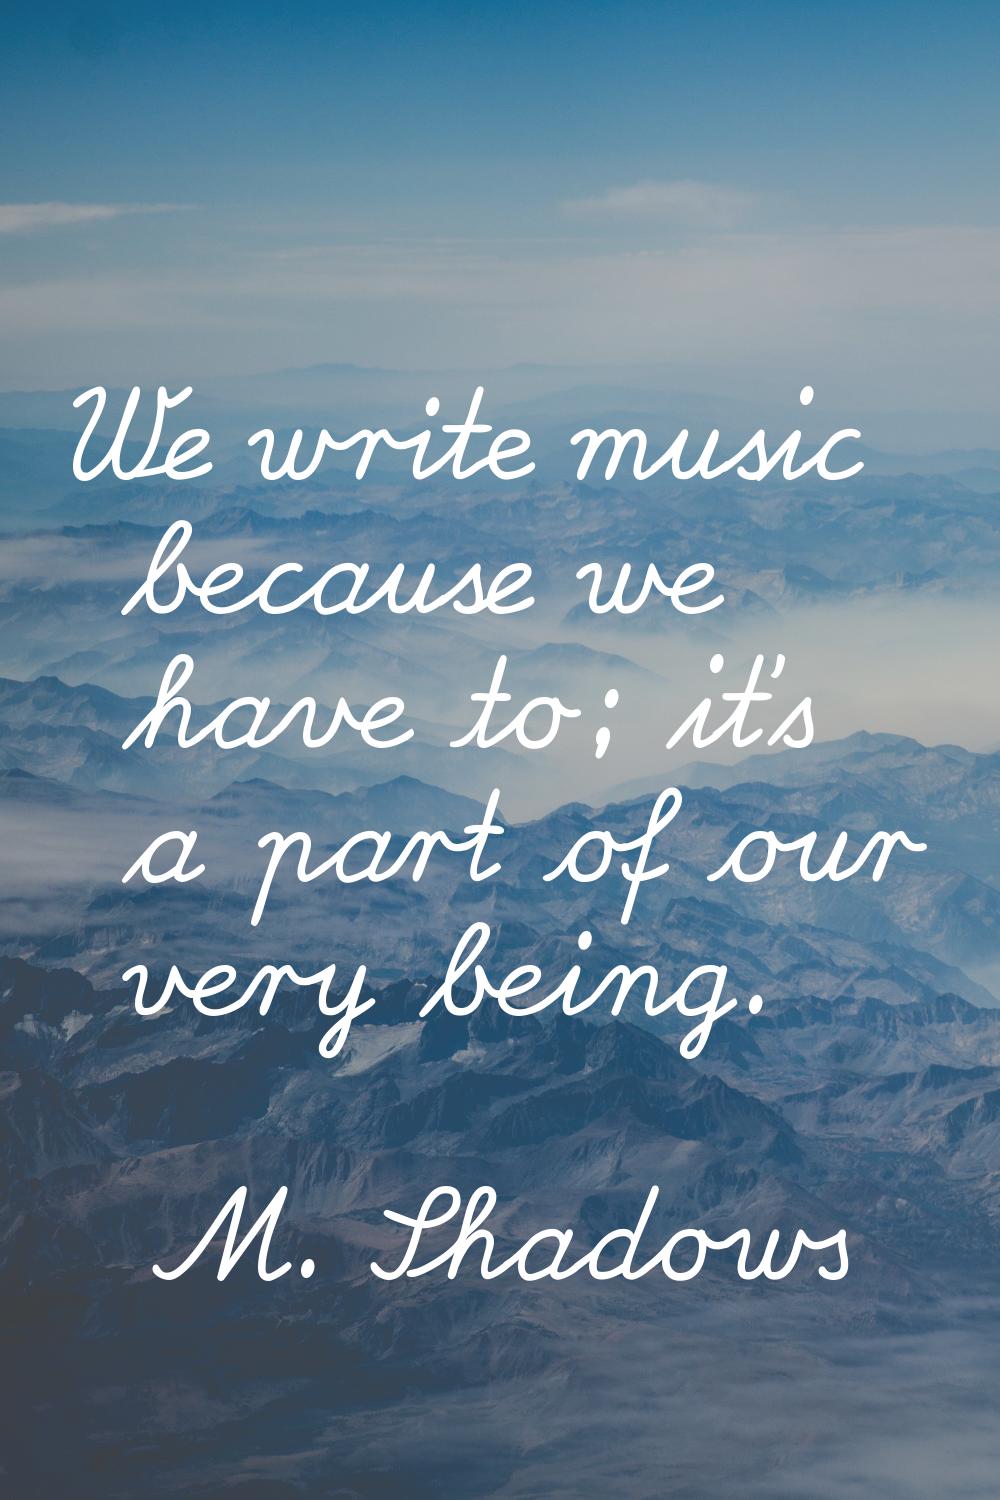 We write music because we have to; it's a part of our very being.